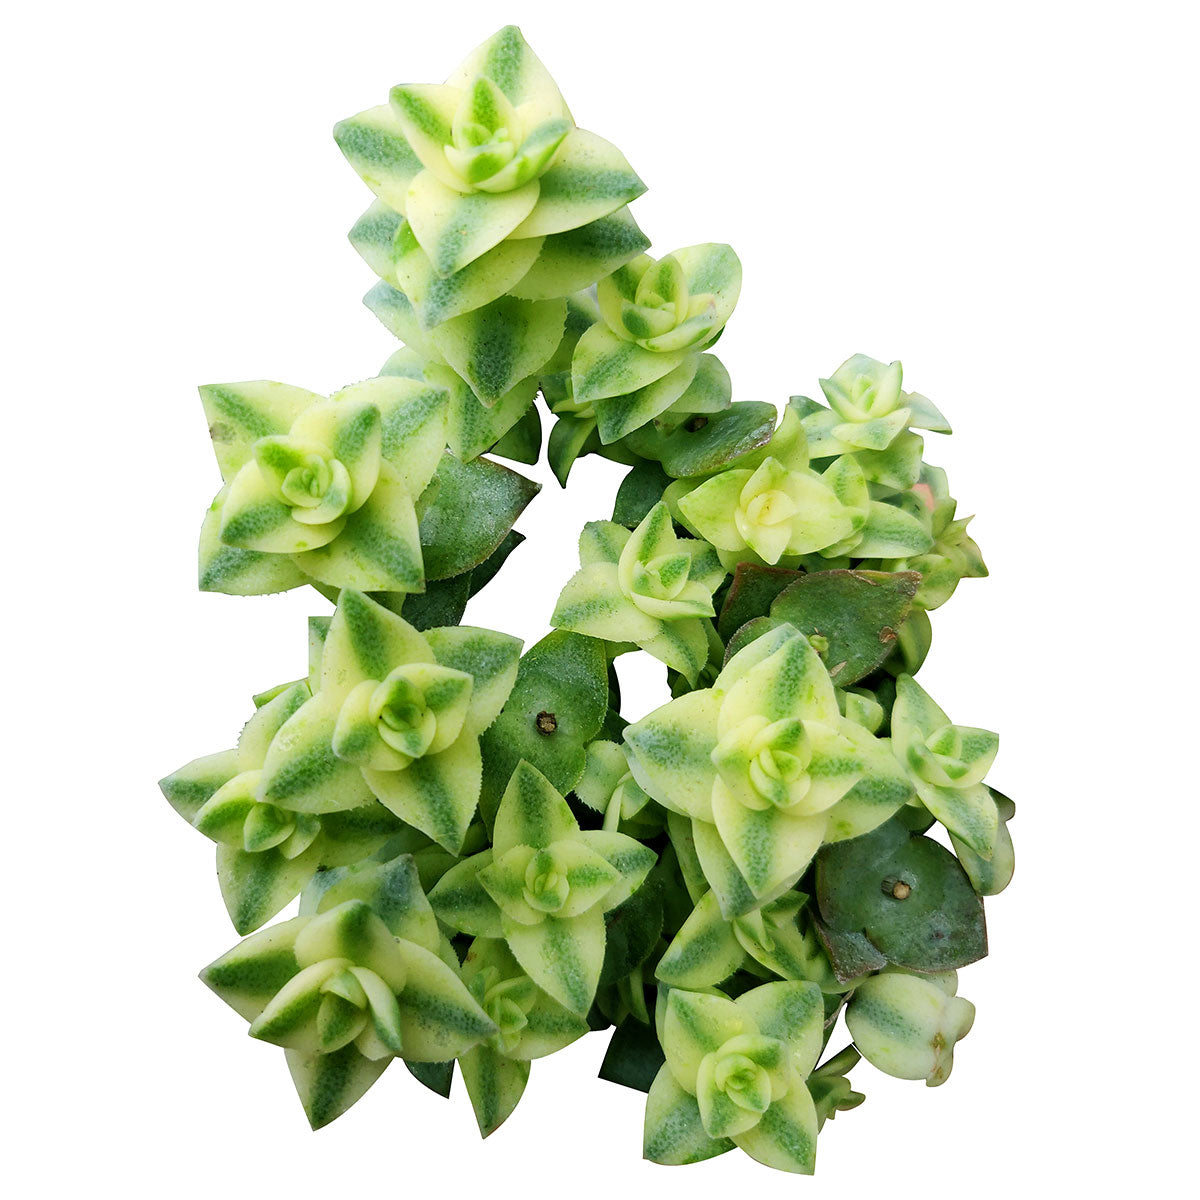 Variegated String of Buttons, succulents store in CA, succulent plant, succulents garden, monthly succulents, succulent care, Rare succulents, Succulents, Succulents shop near me, Variegated String of Buttons in California, How to grow Variegated String of Buttons, crassula, crassula plant, crassula succulent, crassula types, crassula varieties, types of crassula, crassula species, crassulas, succulent crassula